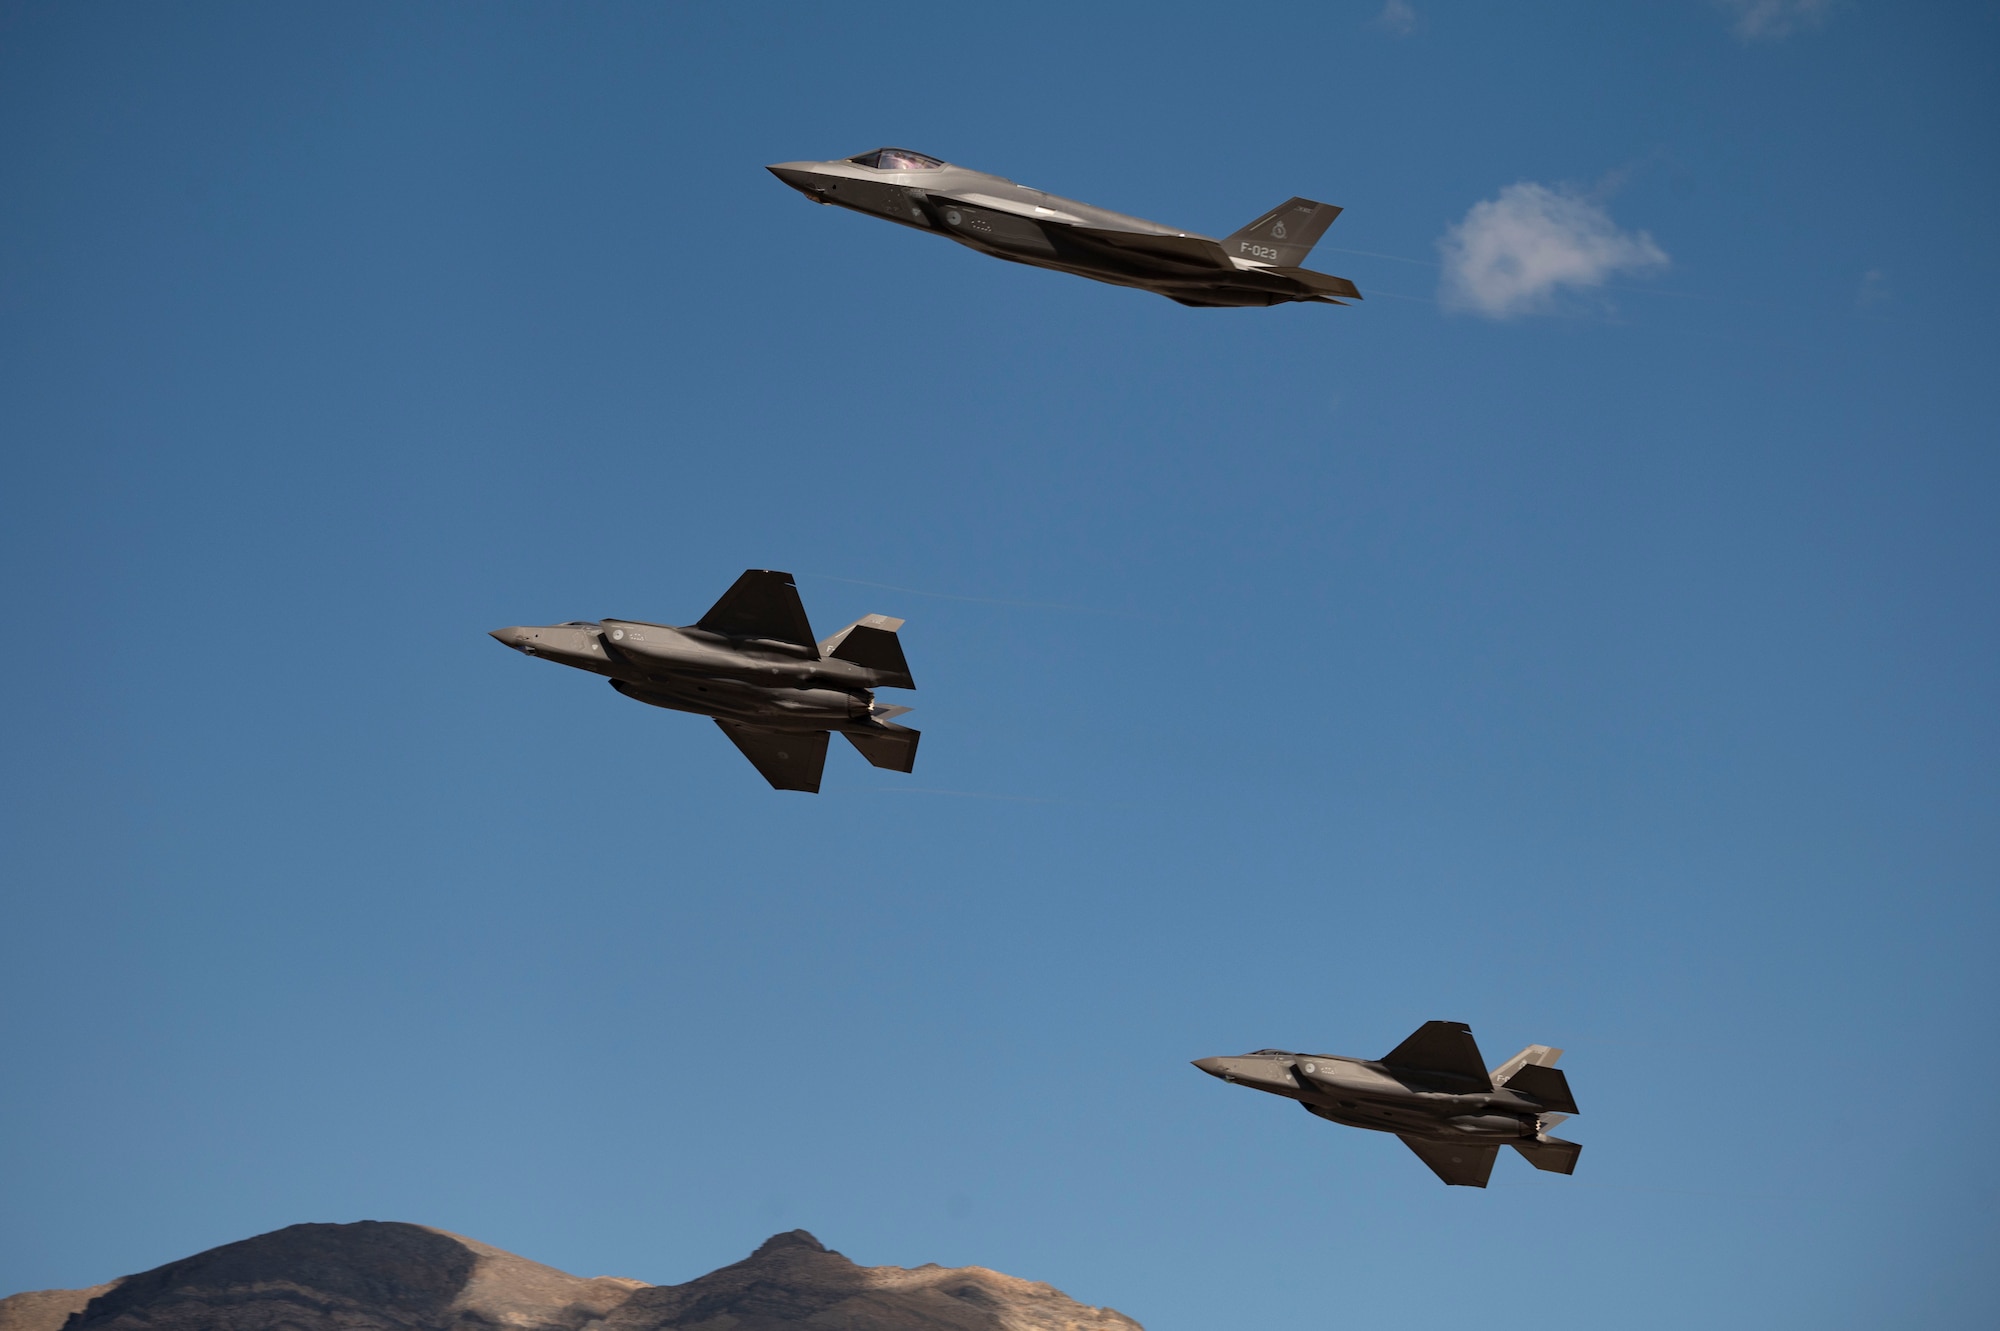 Two Royal Netherlands Air Force F-35A Lightning IIs